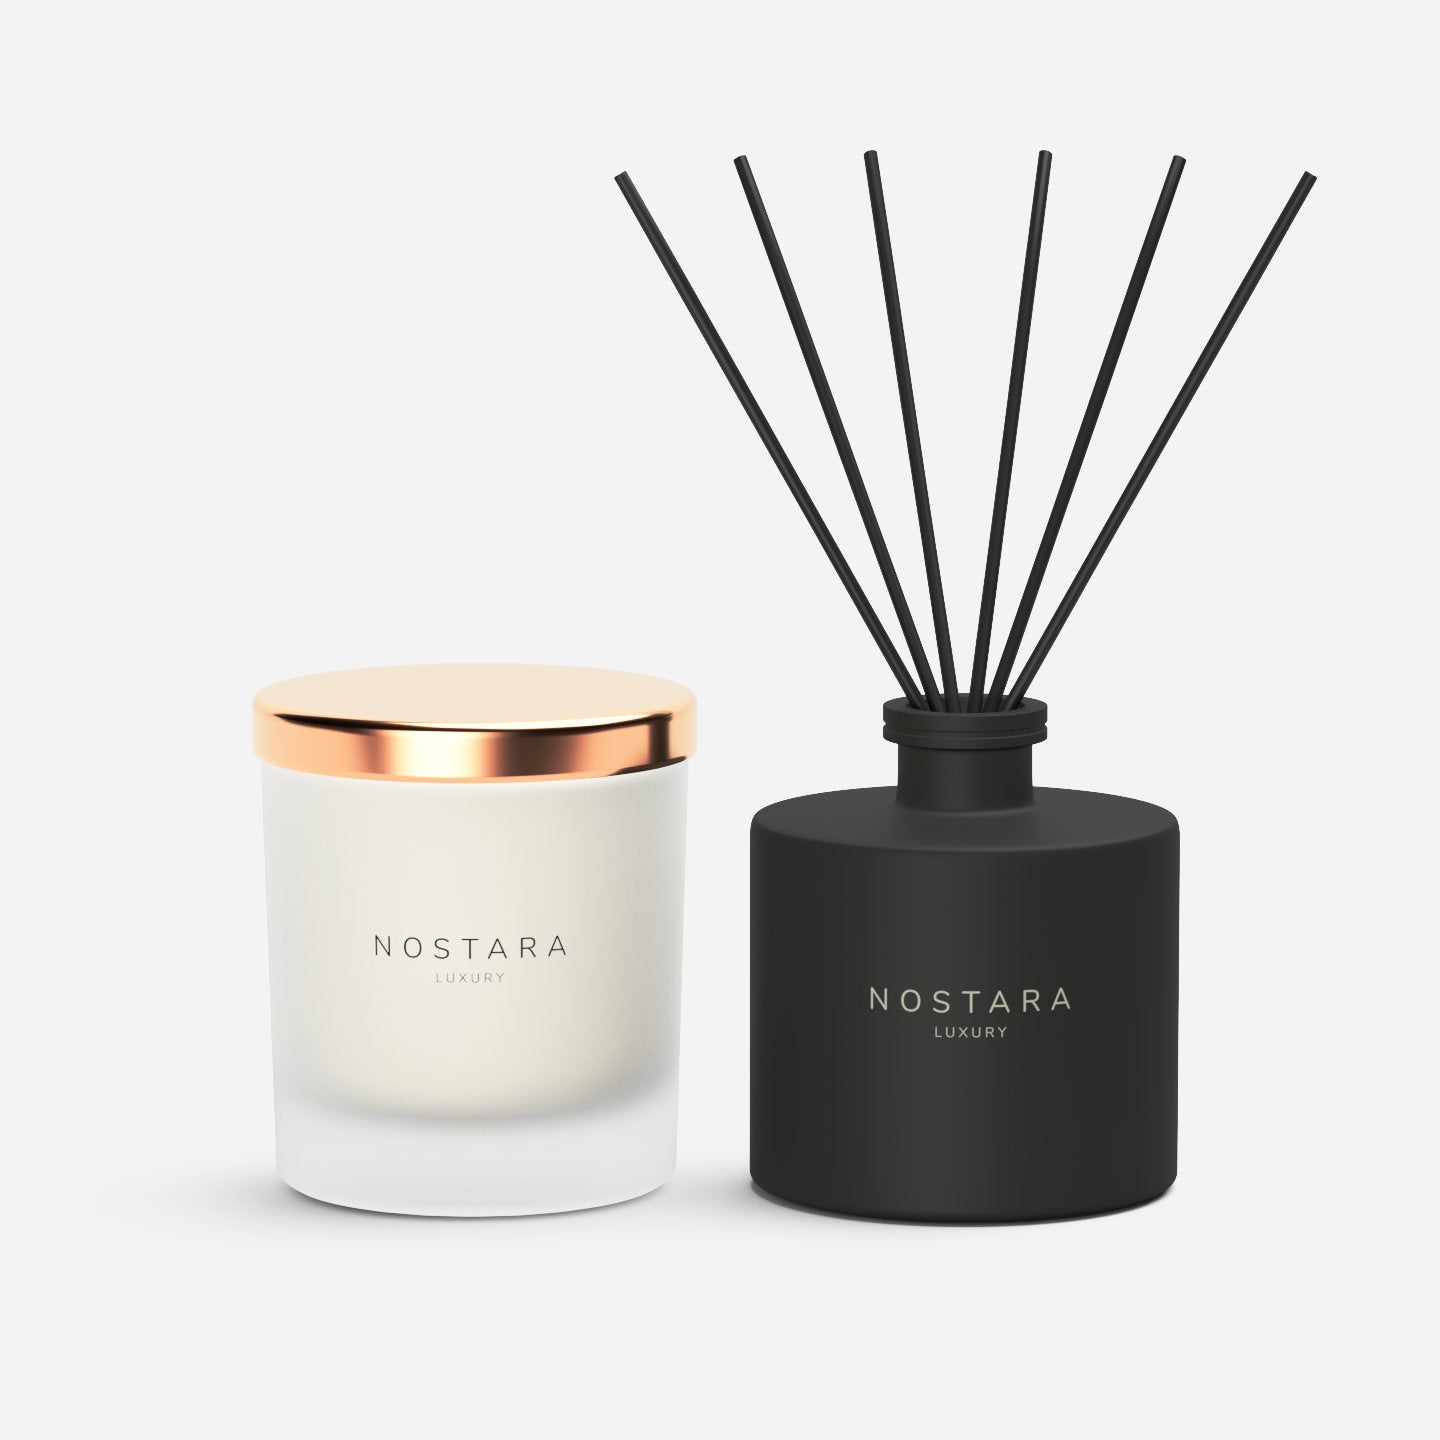 Nostara Home Fragrance Best Sellers core range scented candle and black reed diffuser